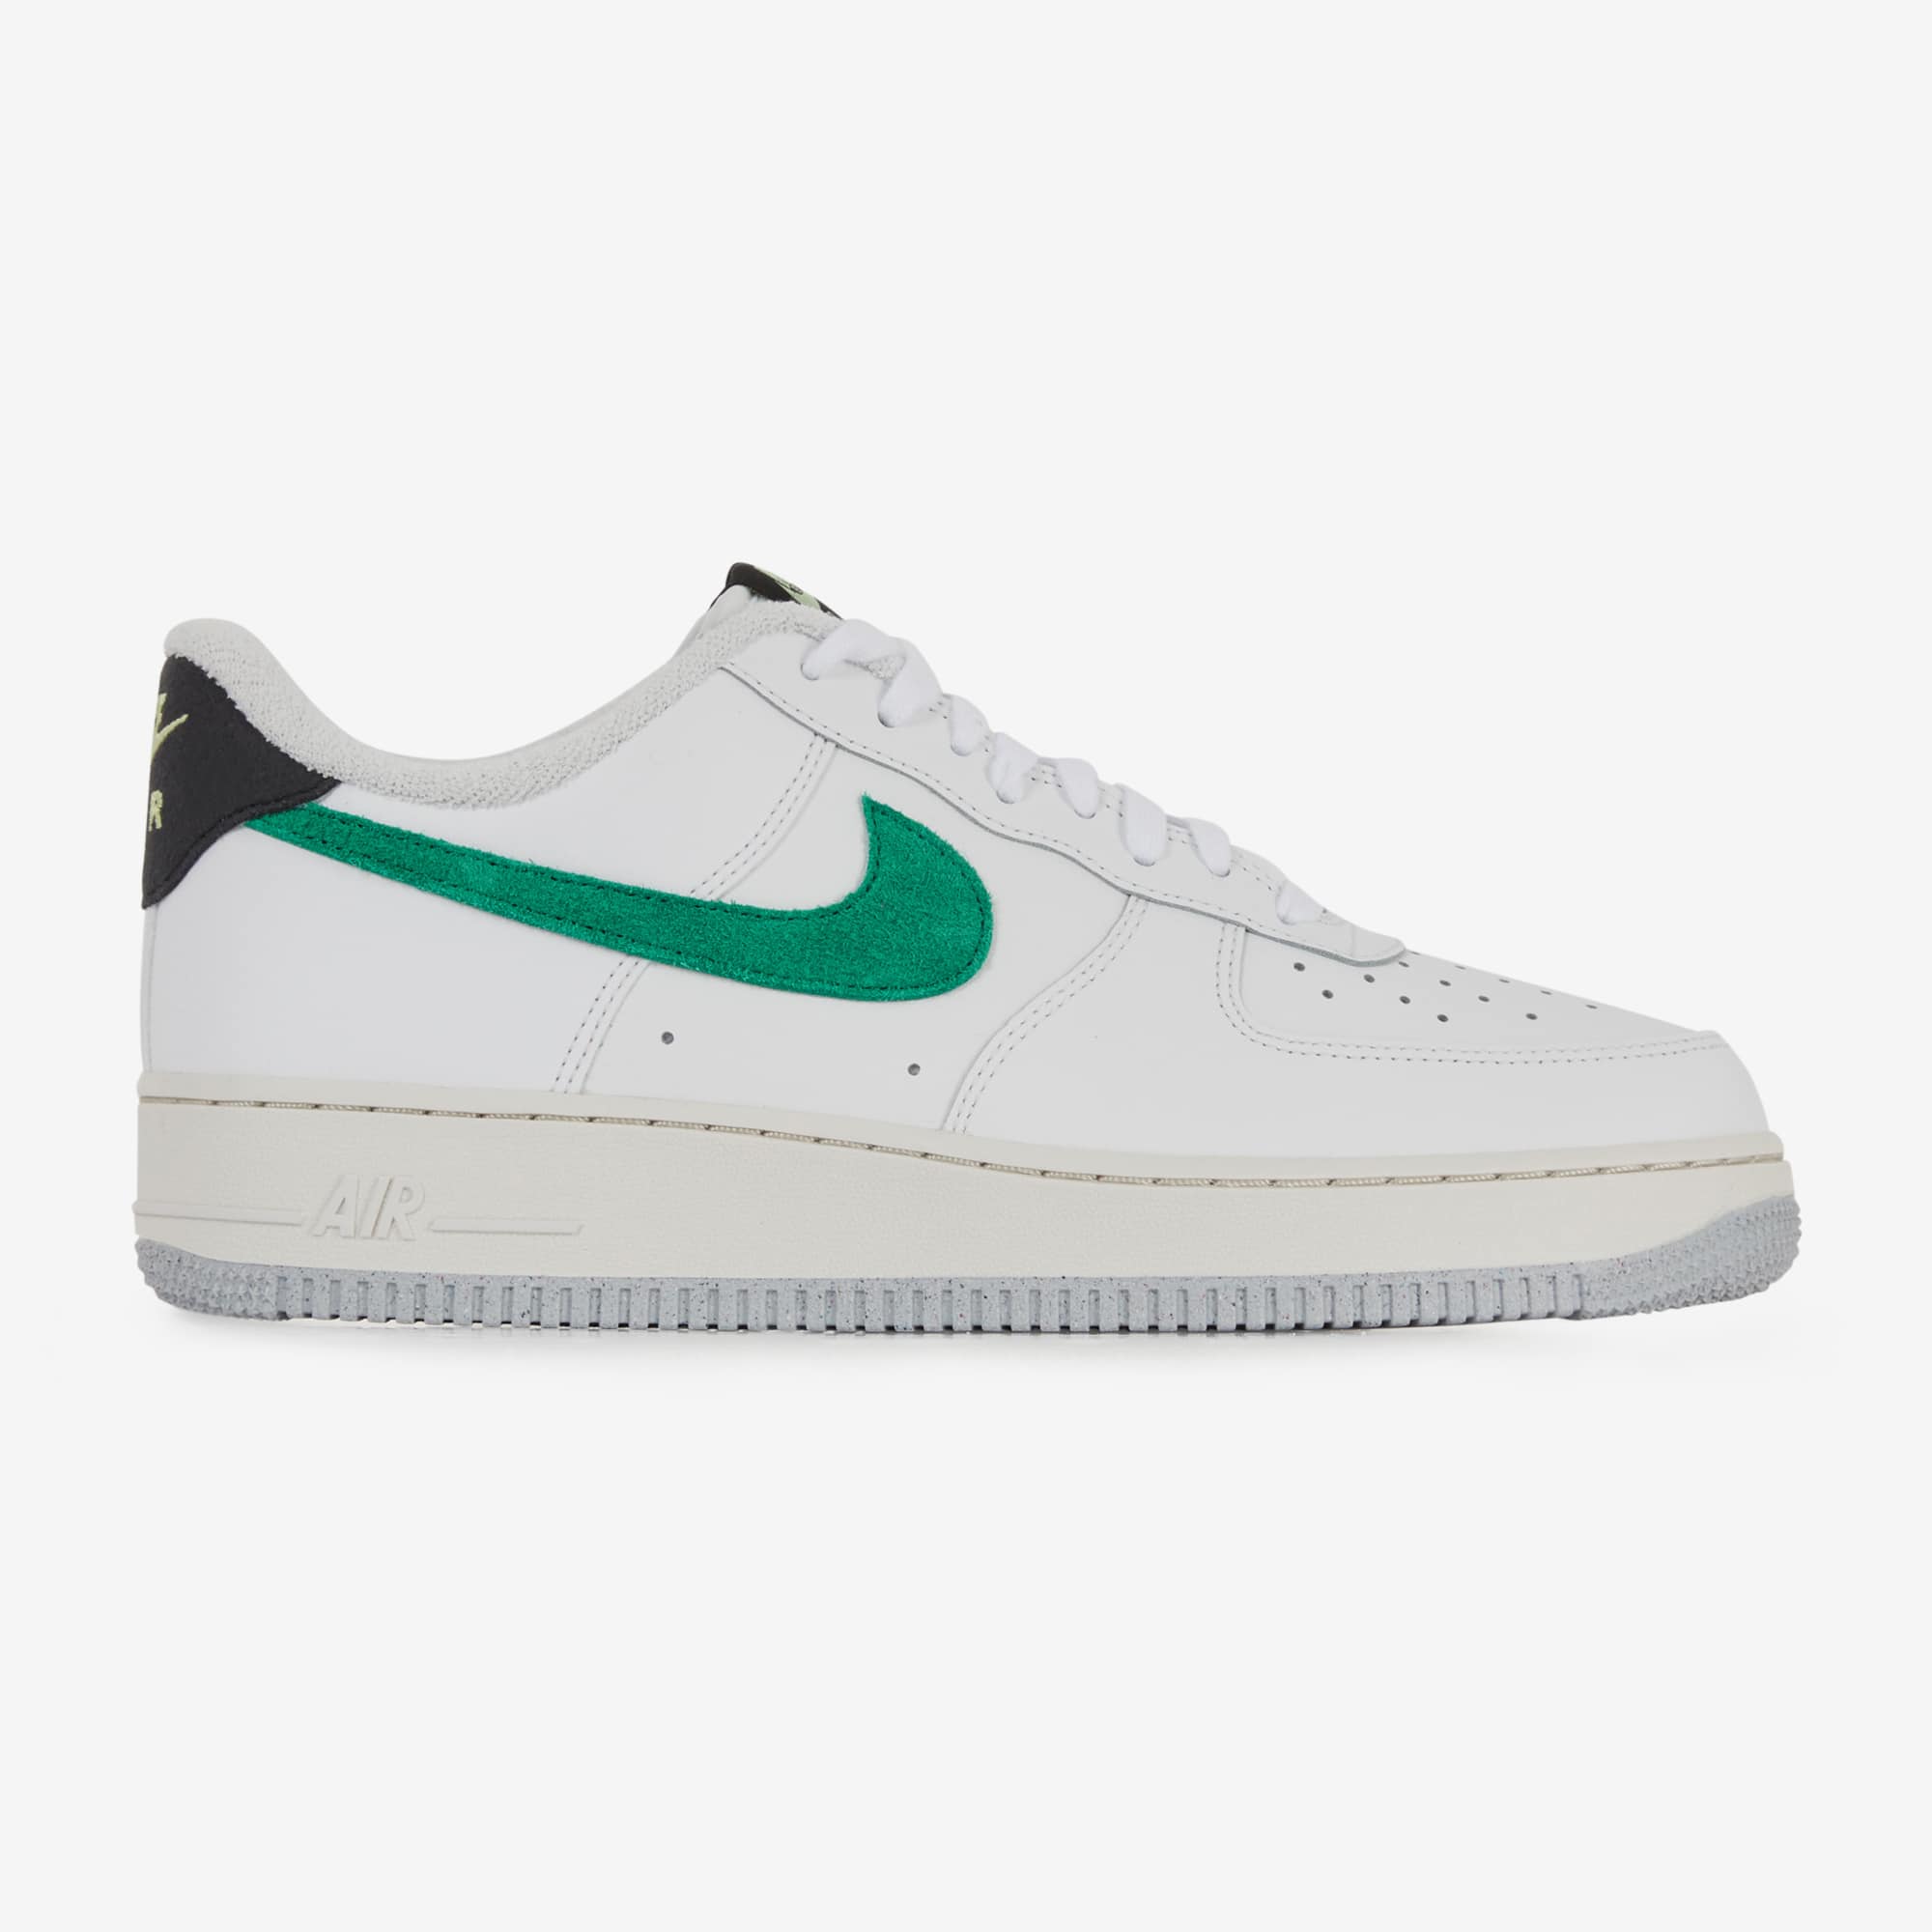 NIKE FORCE 1 LOW WHITE/GREEN - SNEAKERS MEN | Courir.com